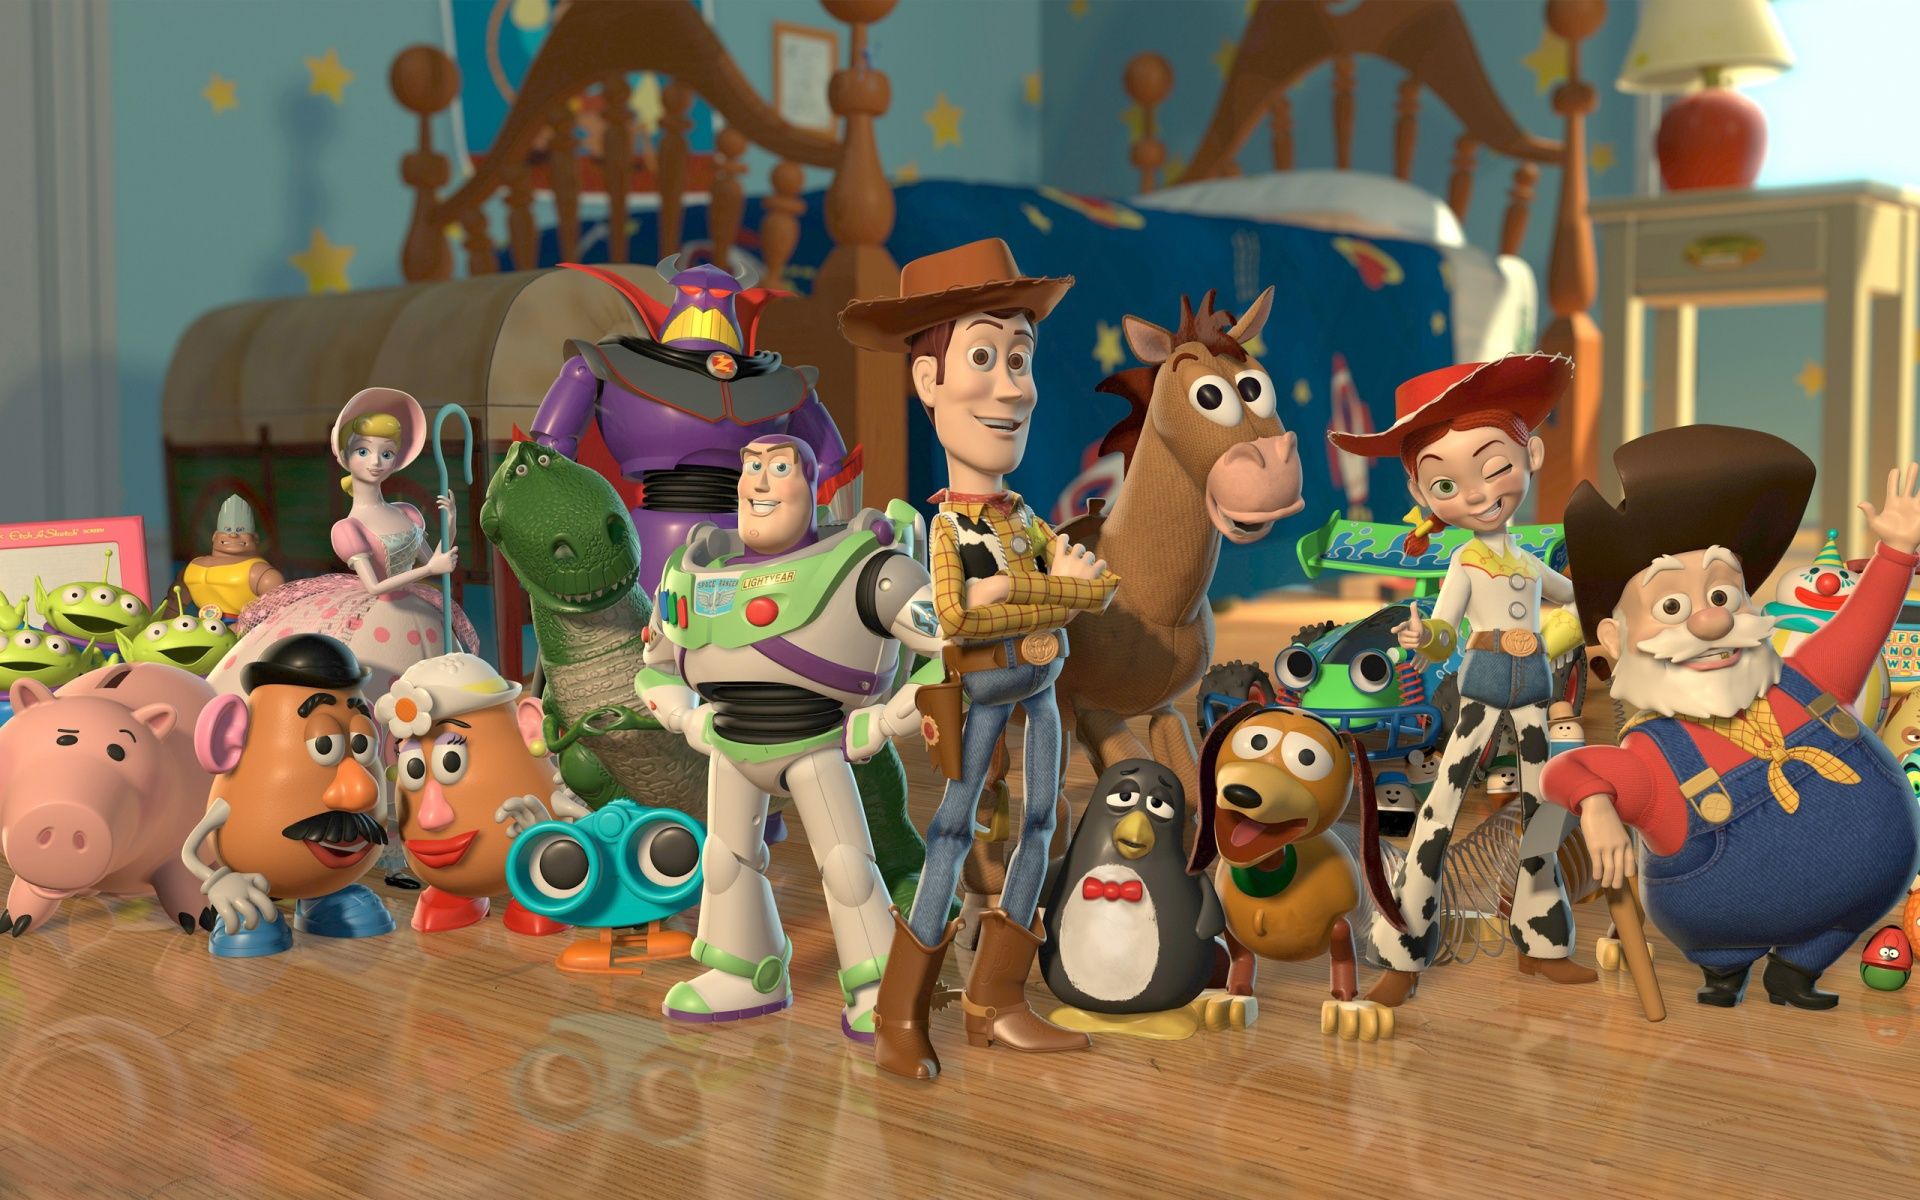 Toy Story Computer Wallpapers, Desktop Backgrounds | 1920x1200 ...